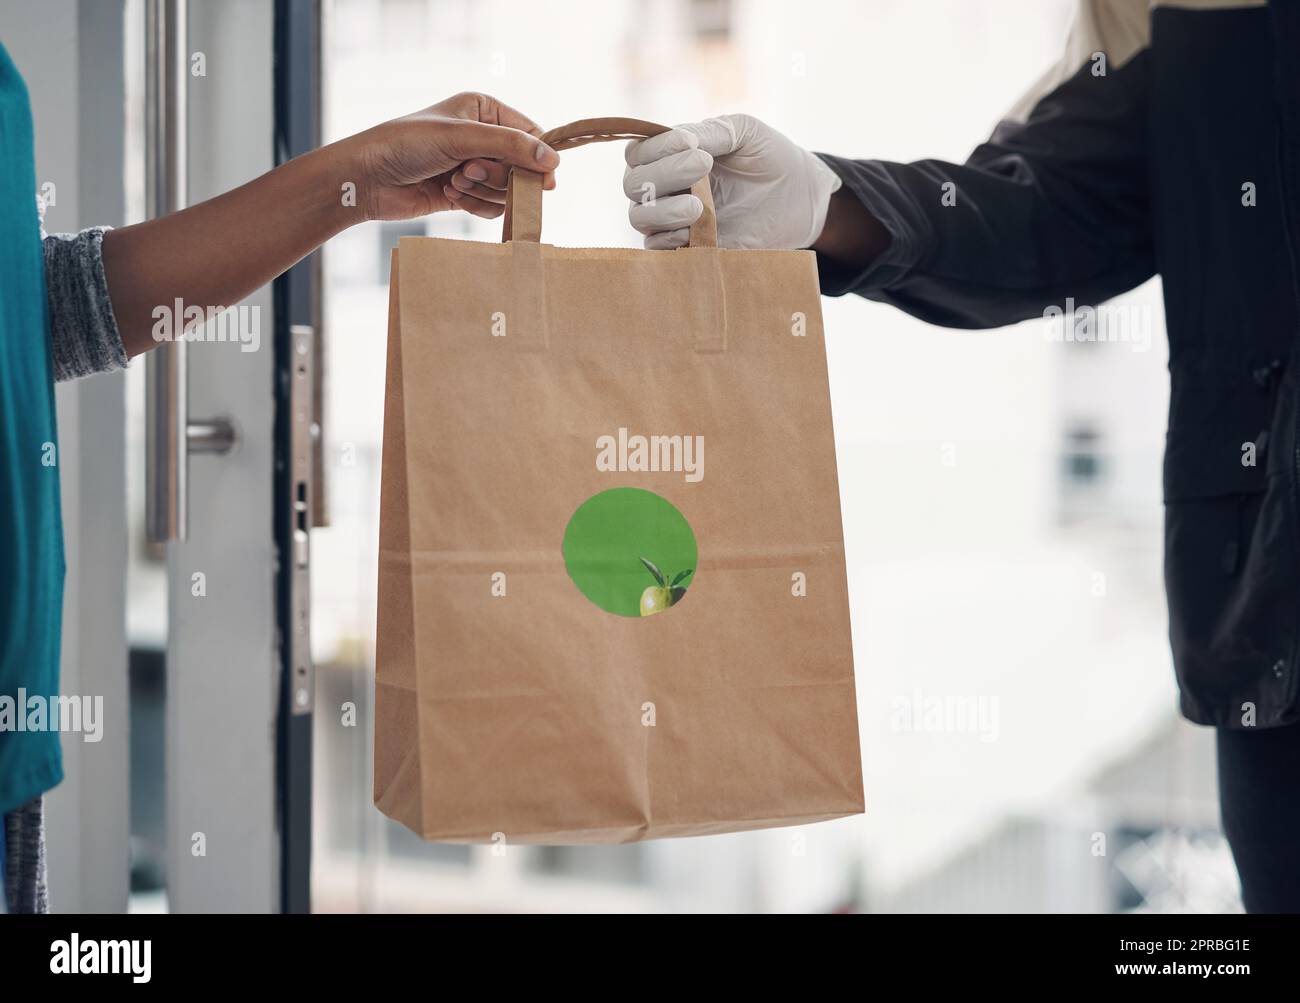 Save yourself the risk of eating out. an unrecognisable man wearing gloves while delivering takeout to a customer at home. Stock Photo